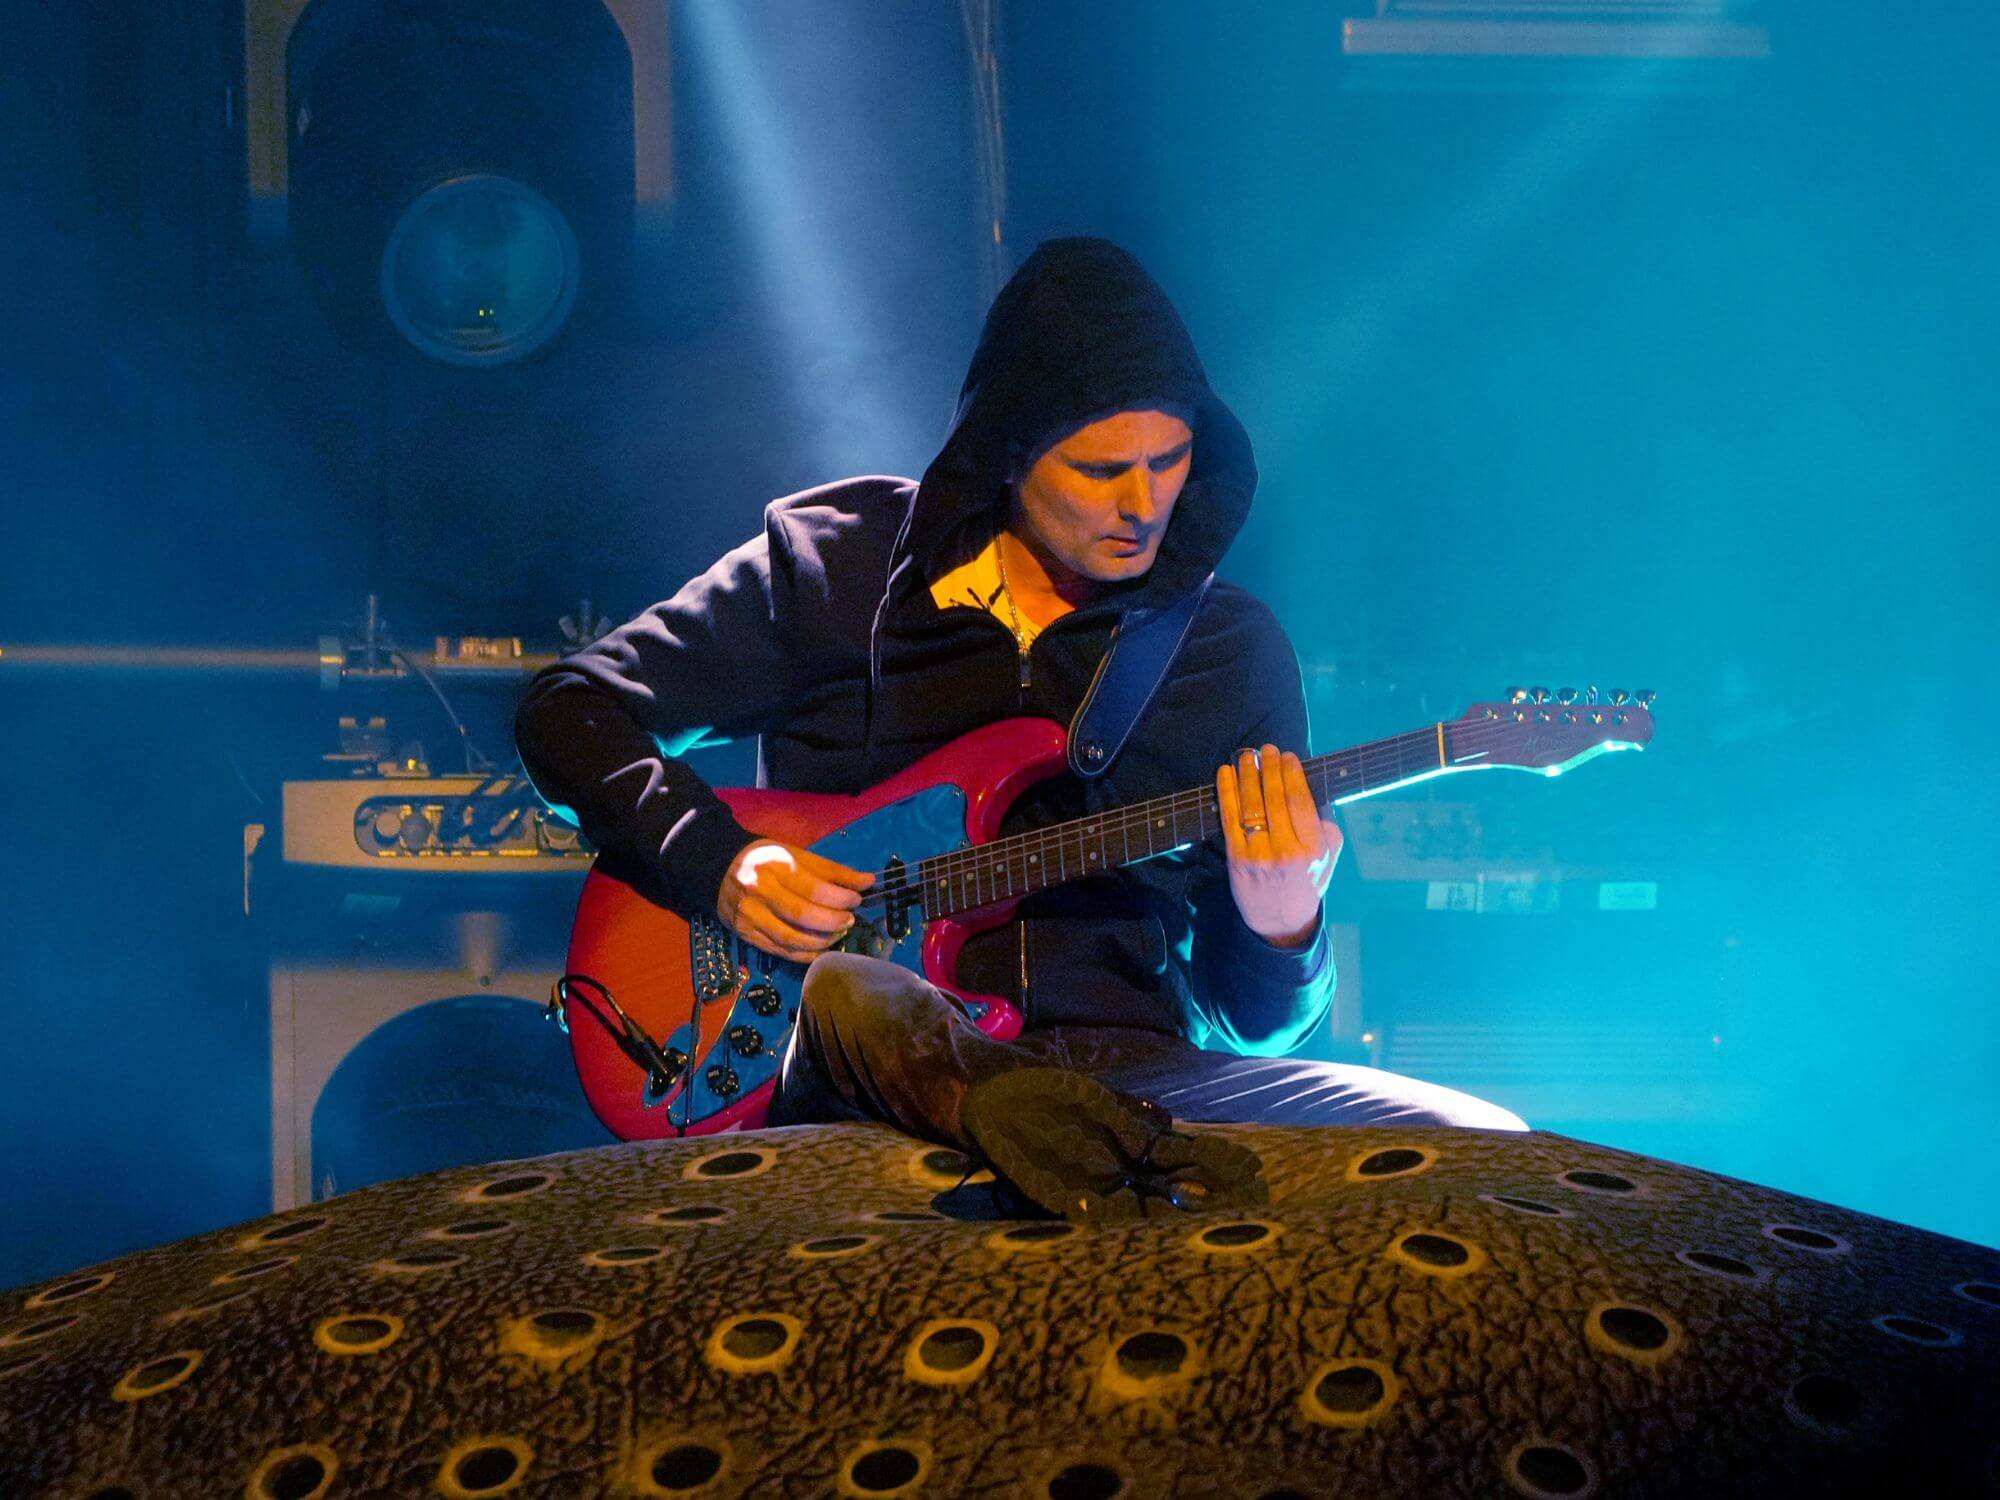 Matt Bellamy using Manson prototype during Muse's Will of The People tour